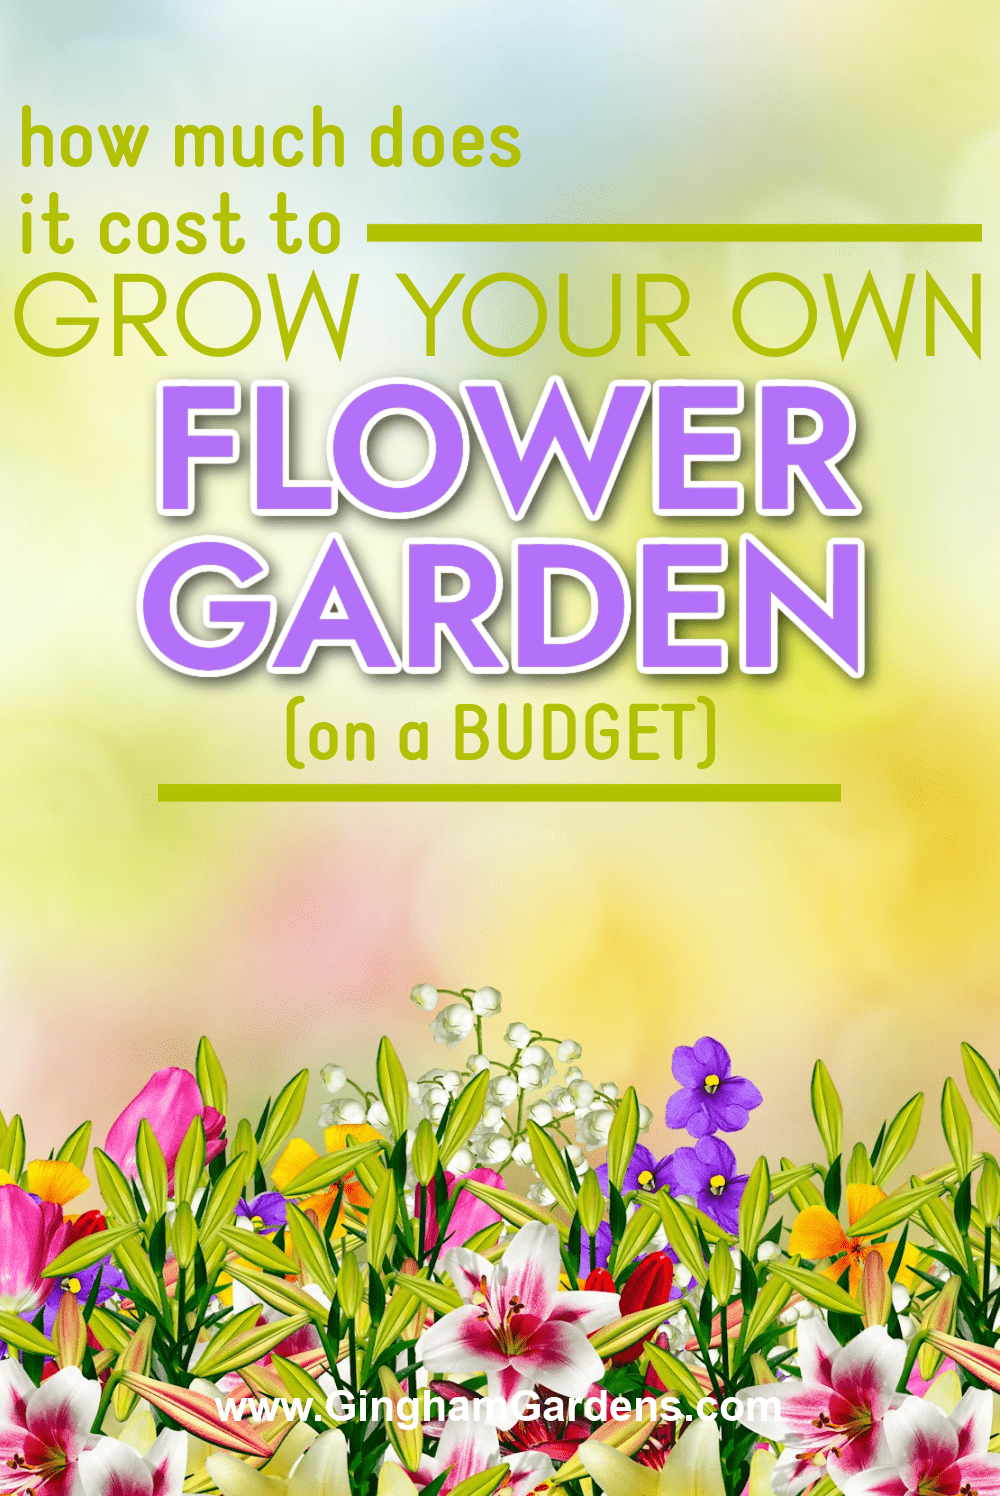 Image of a flower garden with text overlay How much does it cost to grow your own flower garden